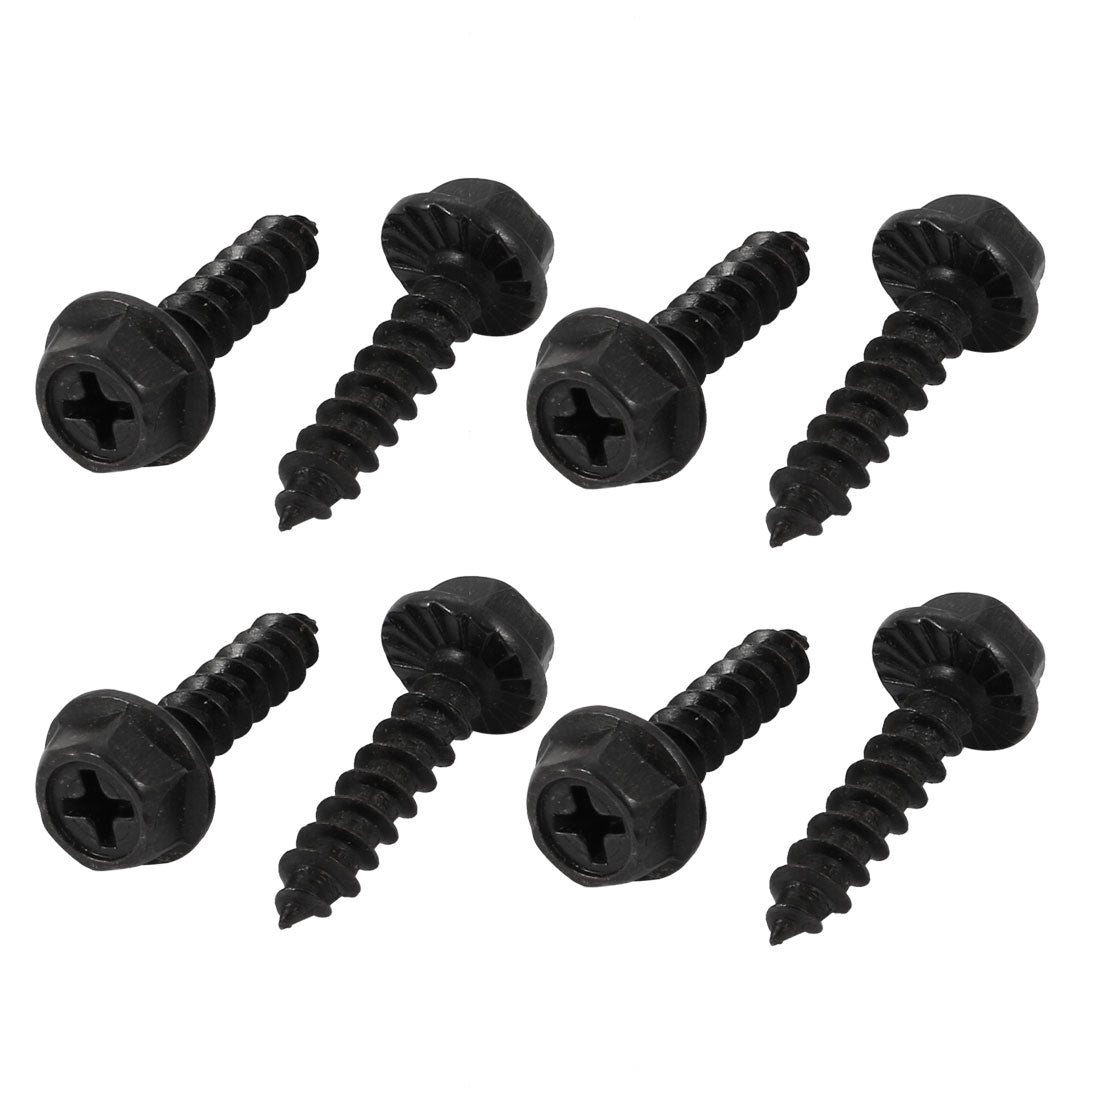 uxcell Uxcell M5x20mm Iron Zinc Plated Self-Tapping Hex Flange Phillips Drive Blot Screw 8pcs